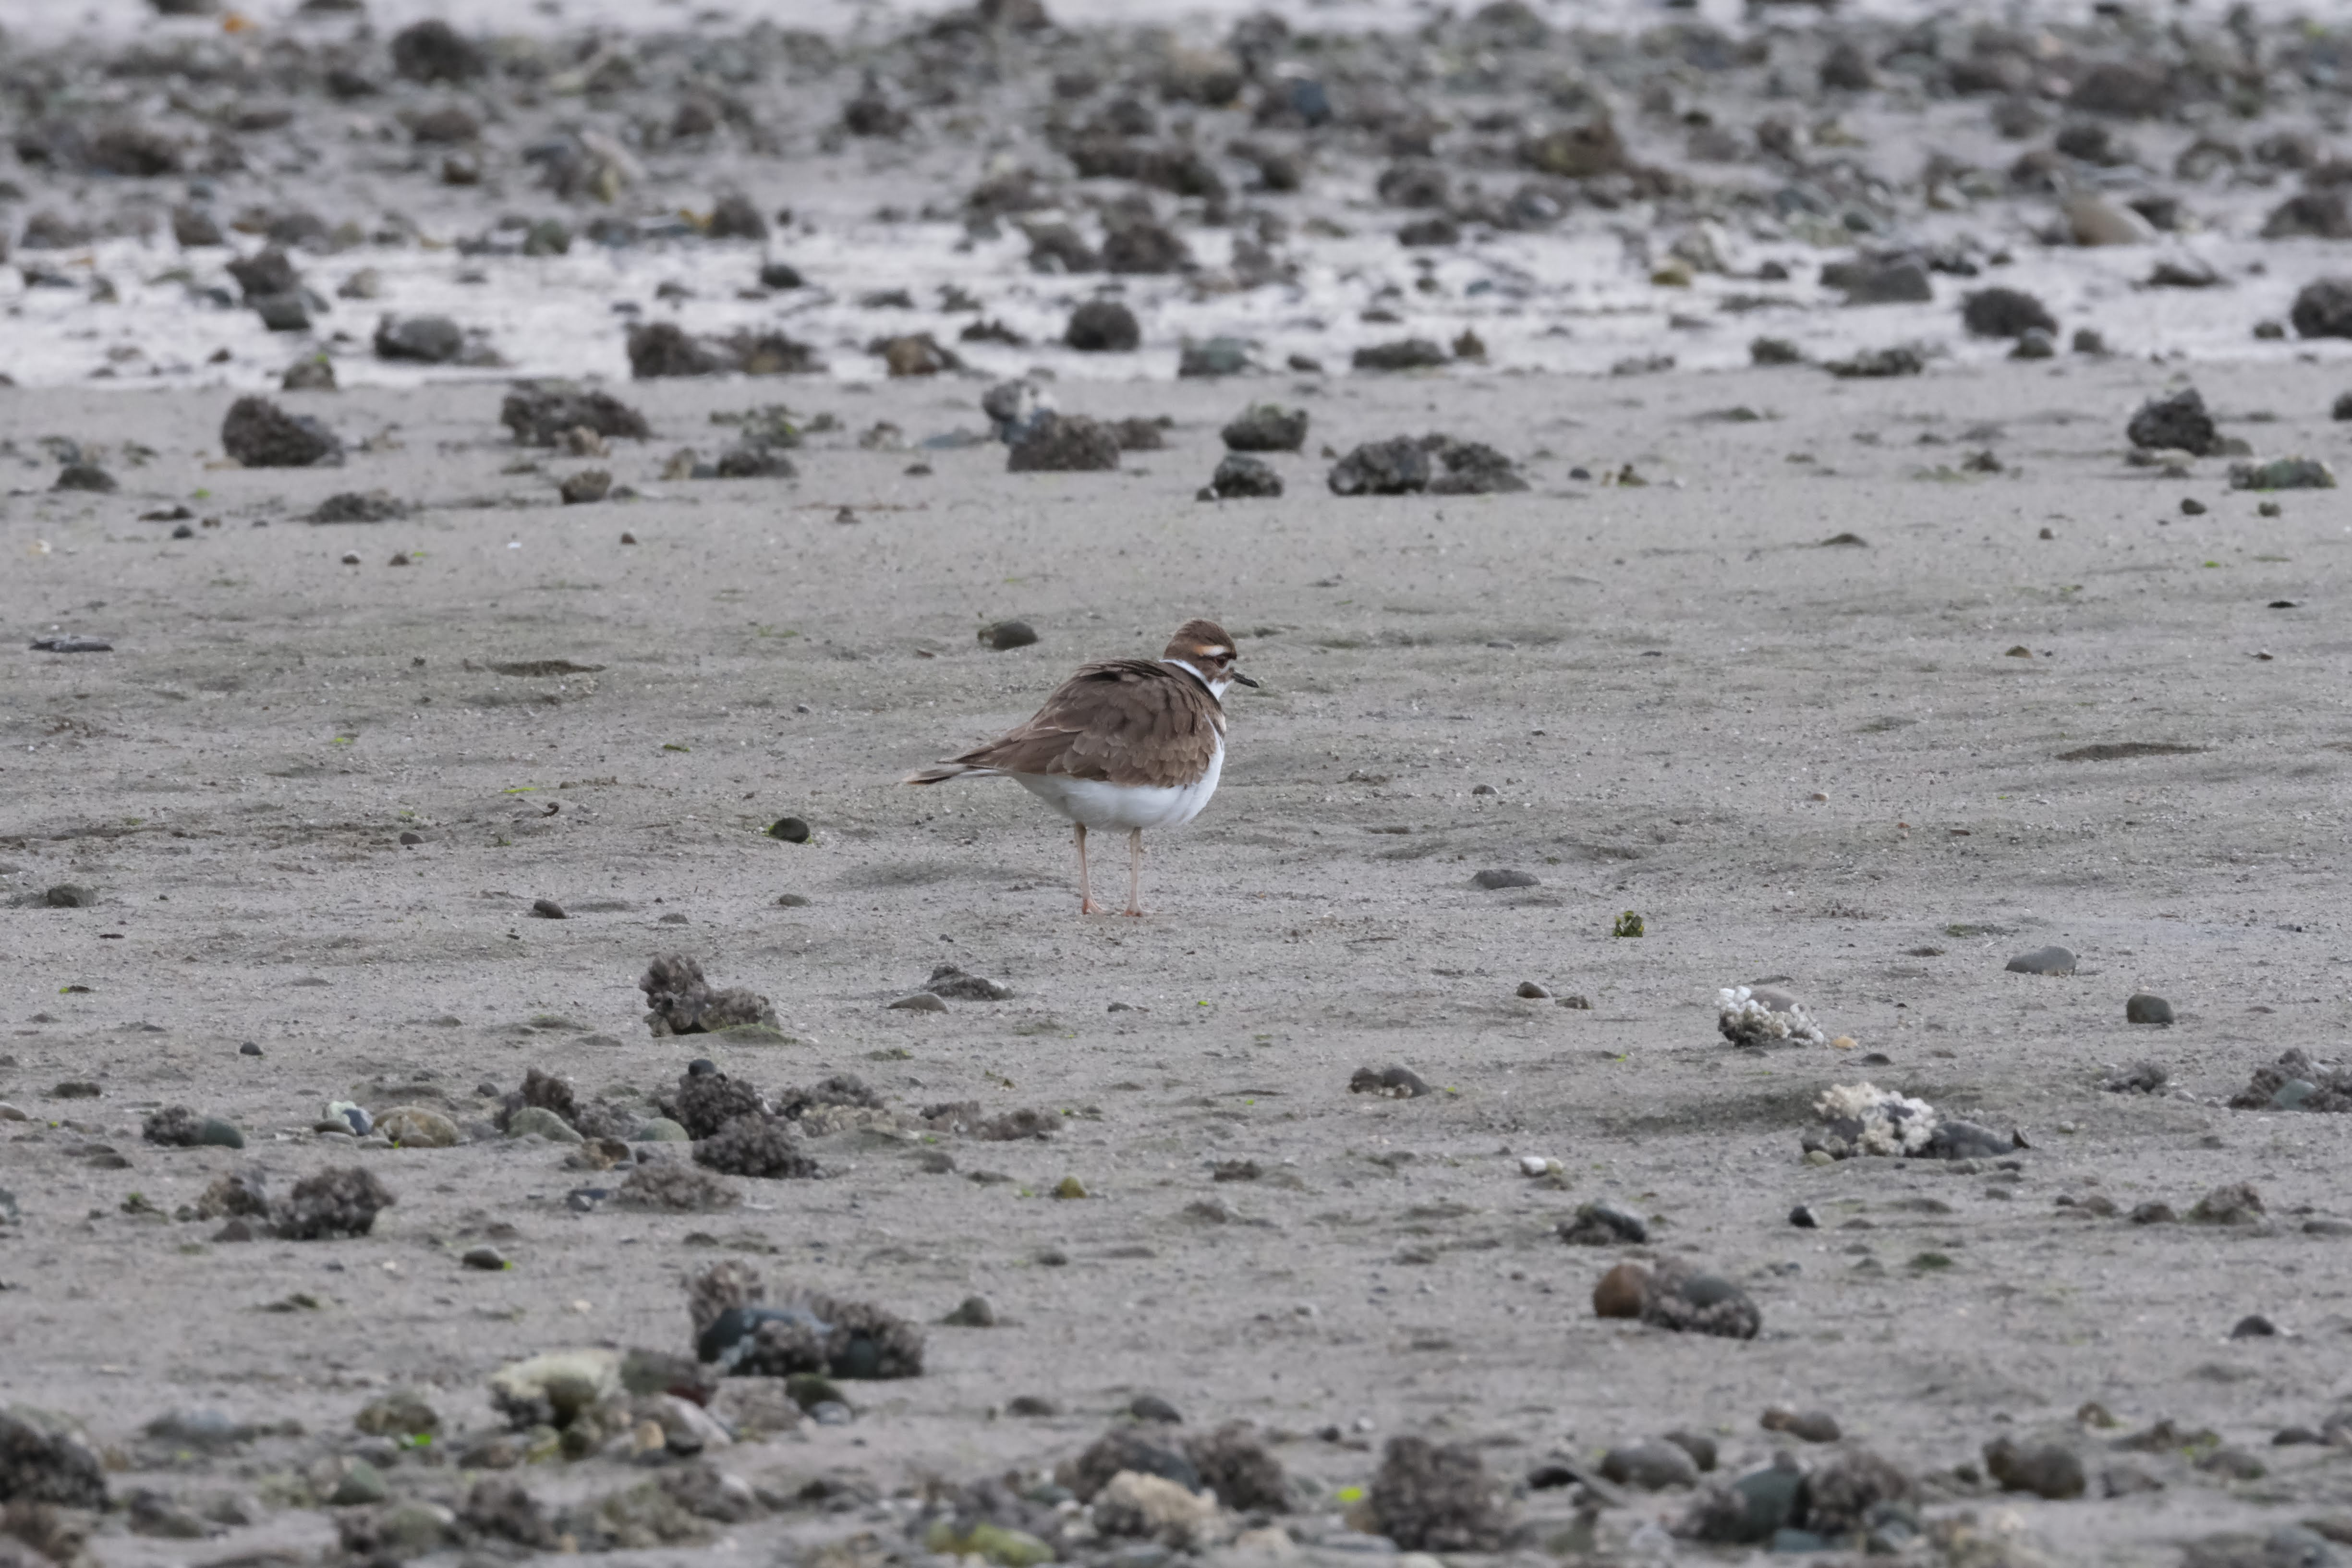 Image unrelated to post. A very fluffed up killdeer stands on a rocky beach.